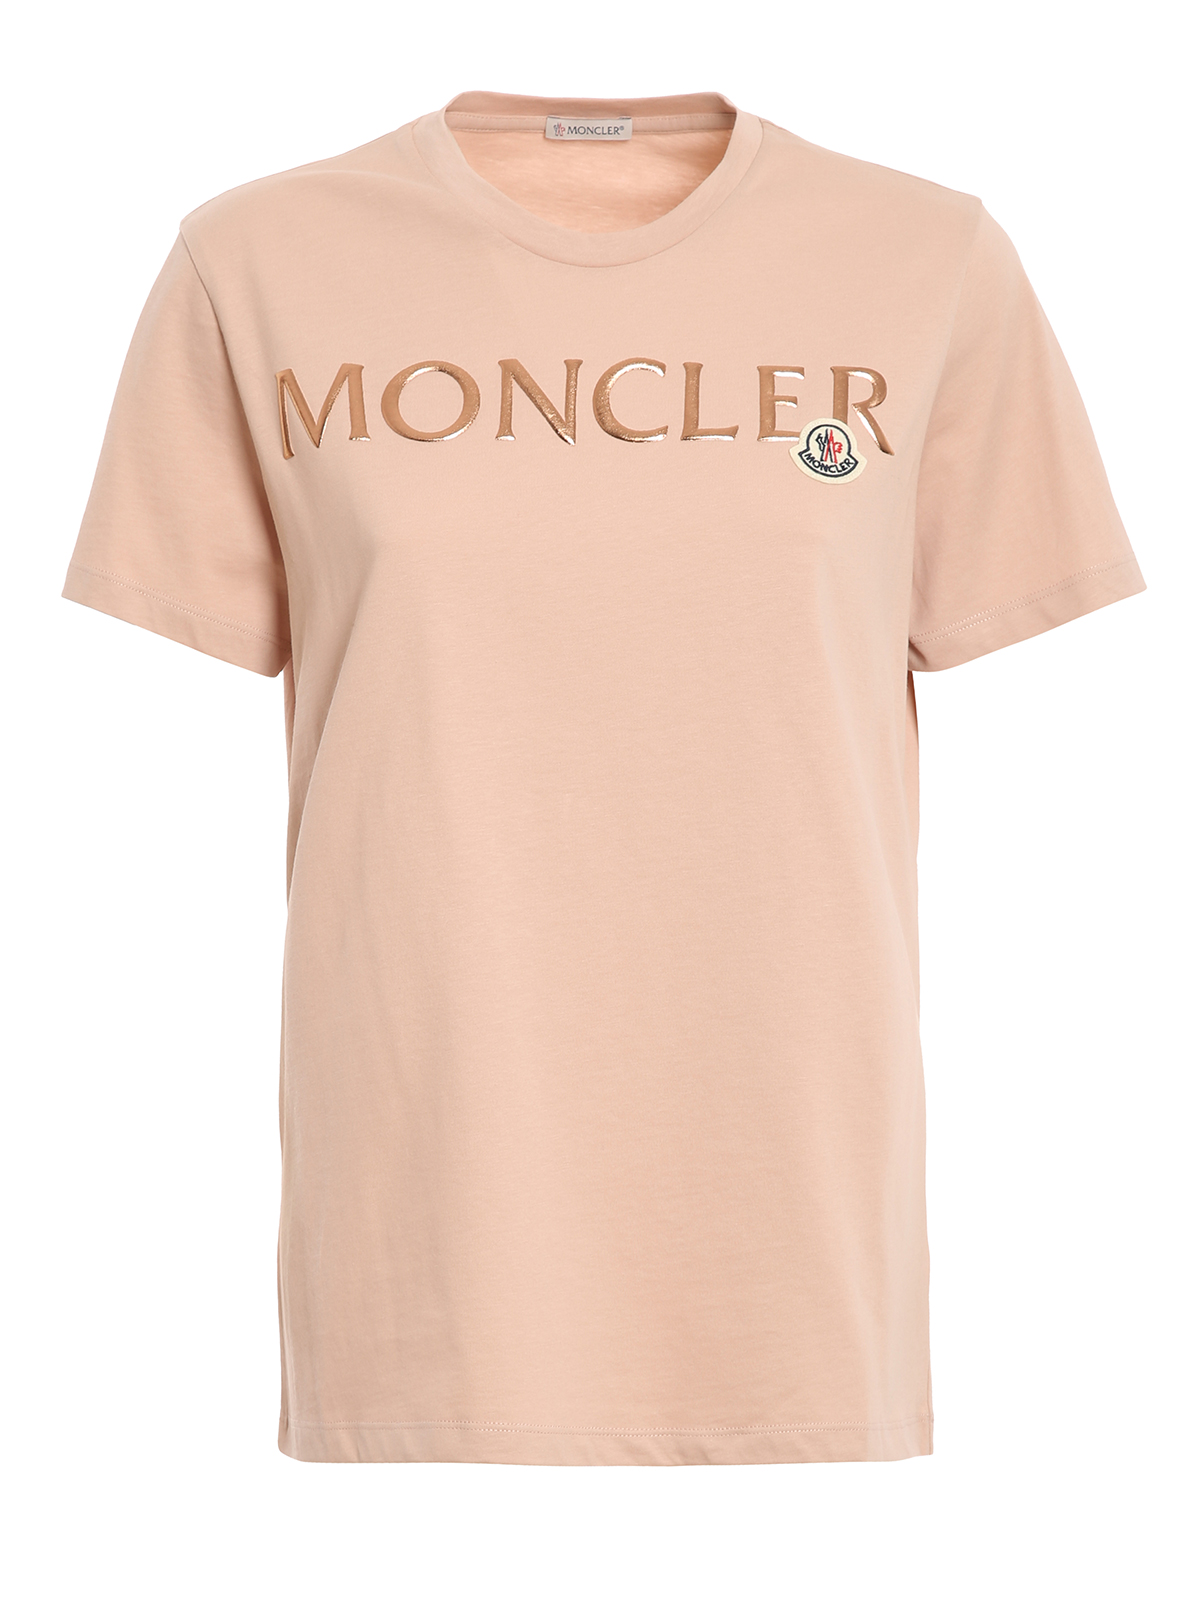 MONCLER LOGO EMBROIDERY T-SHIRT